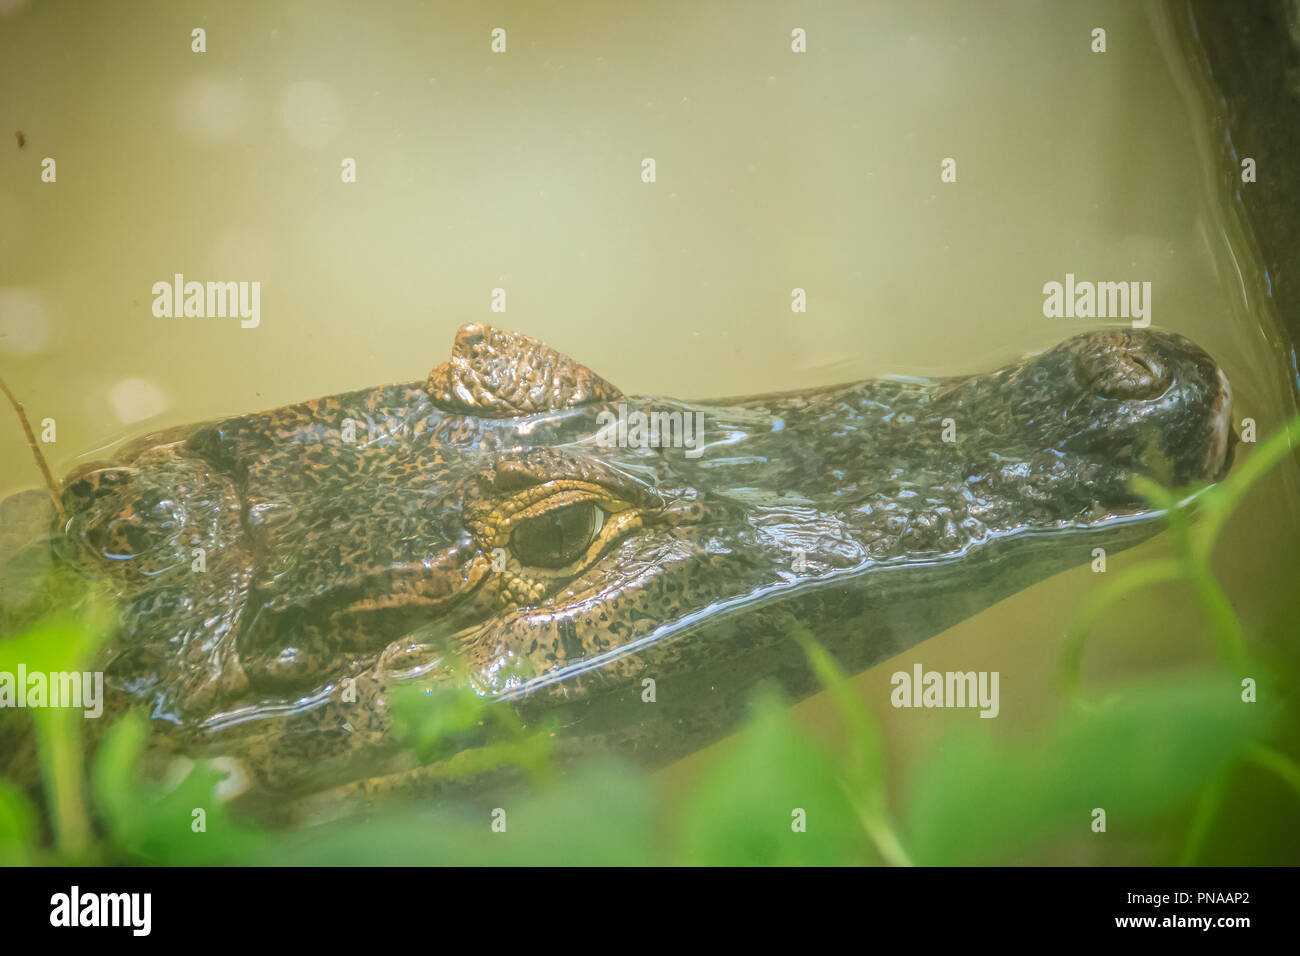 Big and frightening eye of a Caiman (Caimaninae) crocodile staying in still water Stock Photo